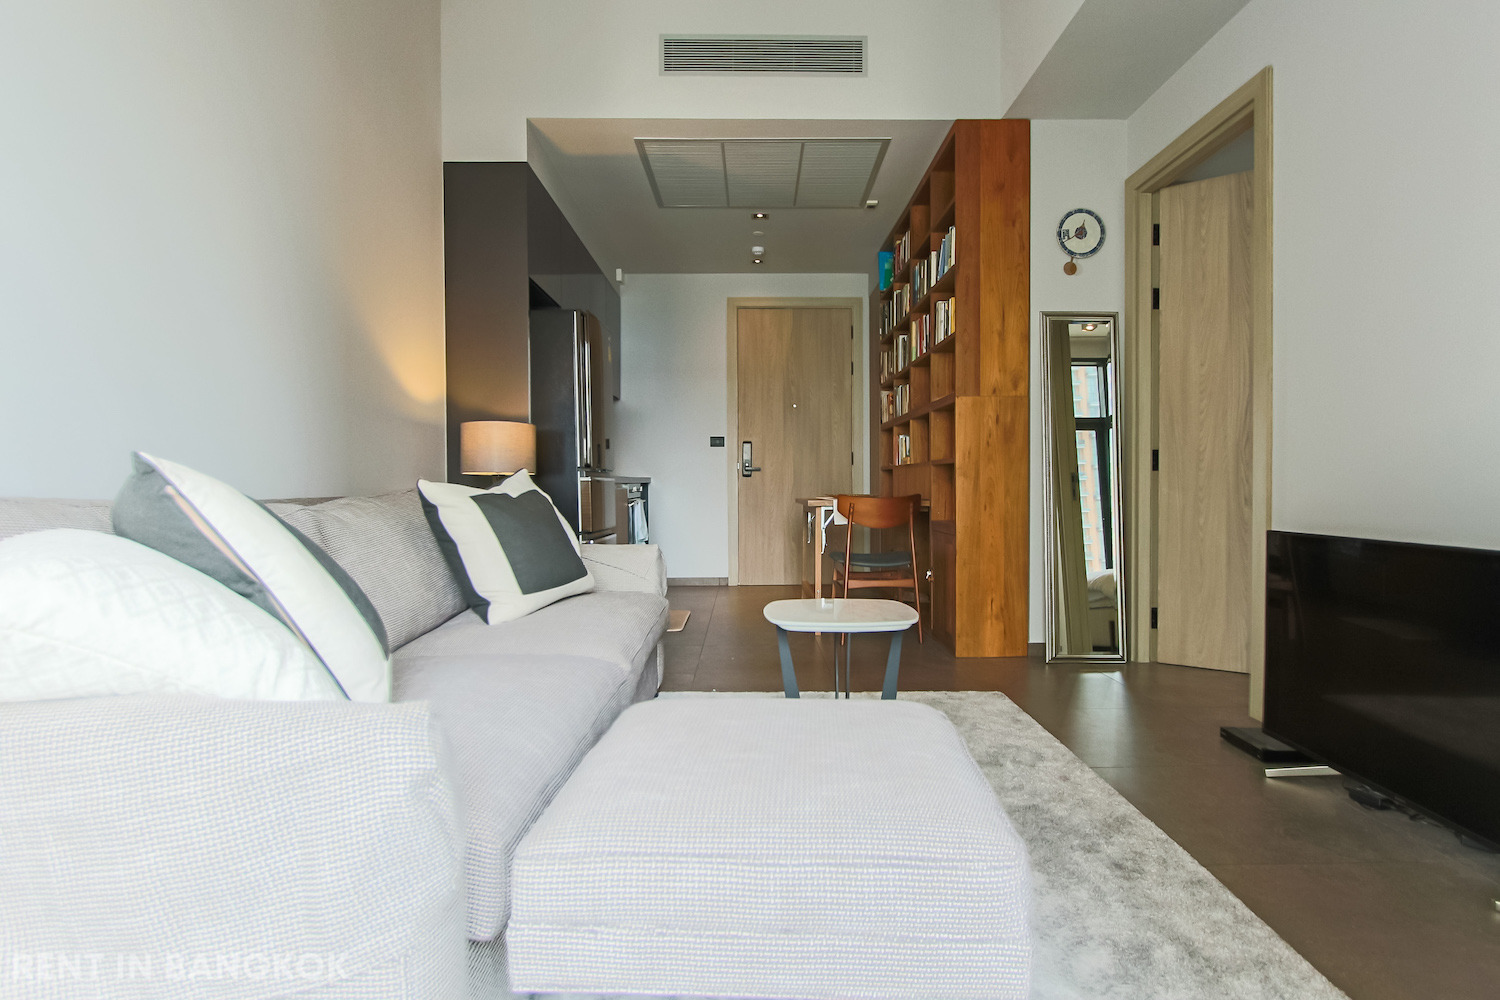 Comfortably One Bedroom Condo for Rent in Asoke